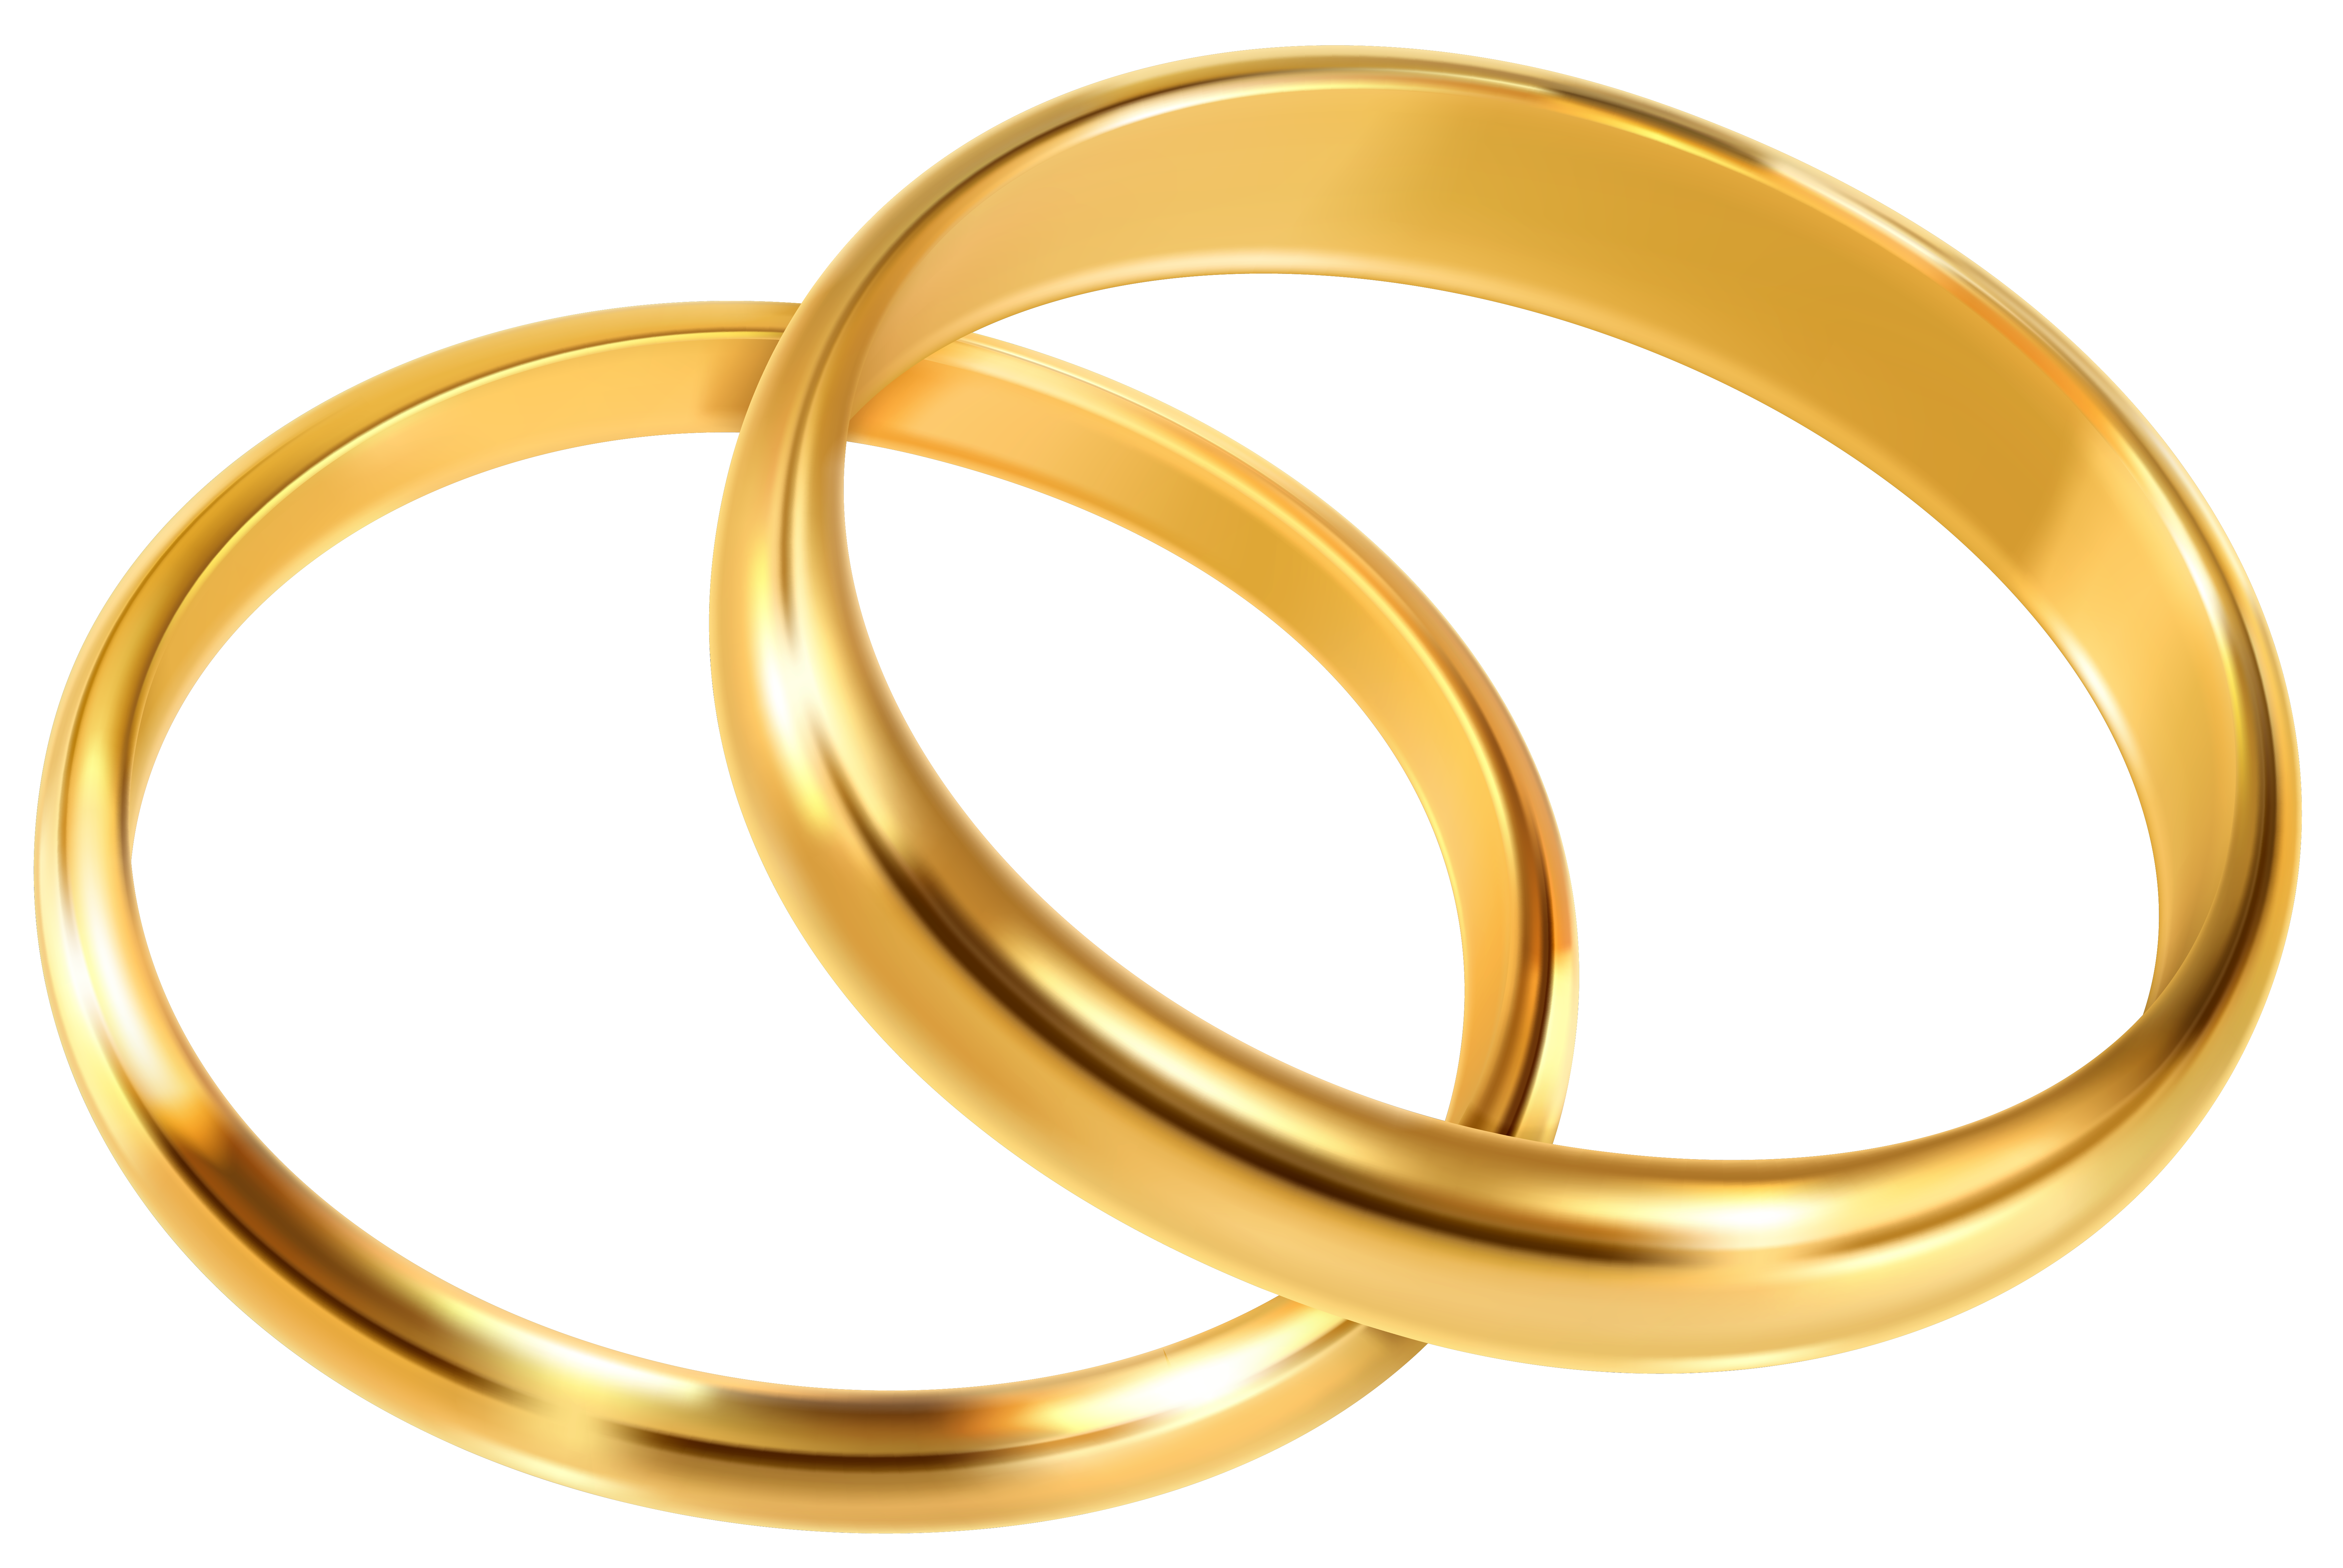 free wedding ring clipart and graphics - photo #41